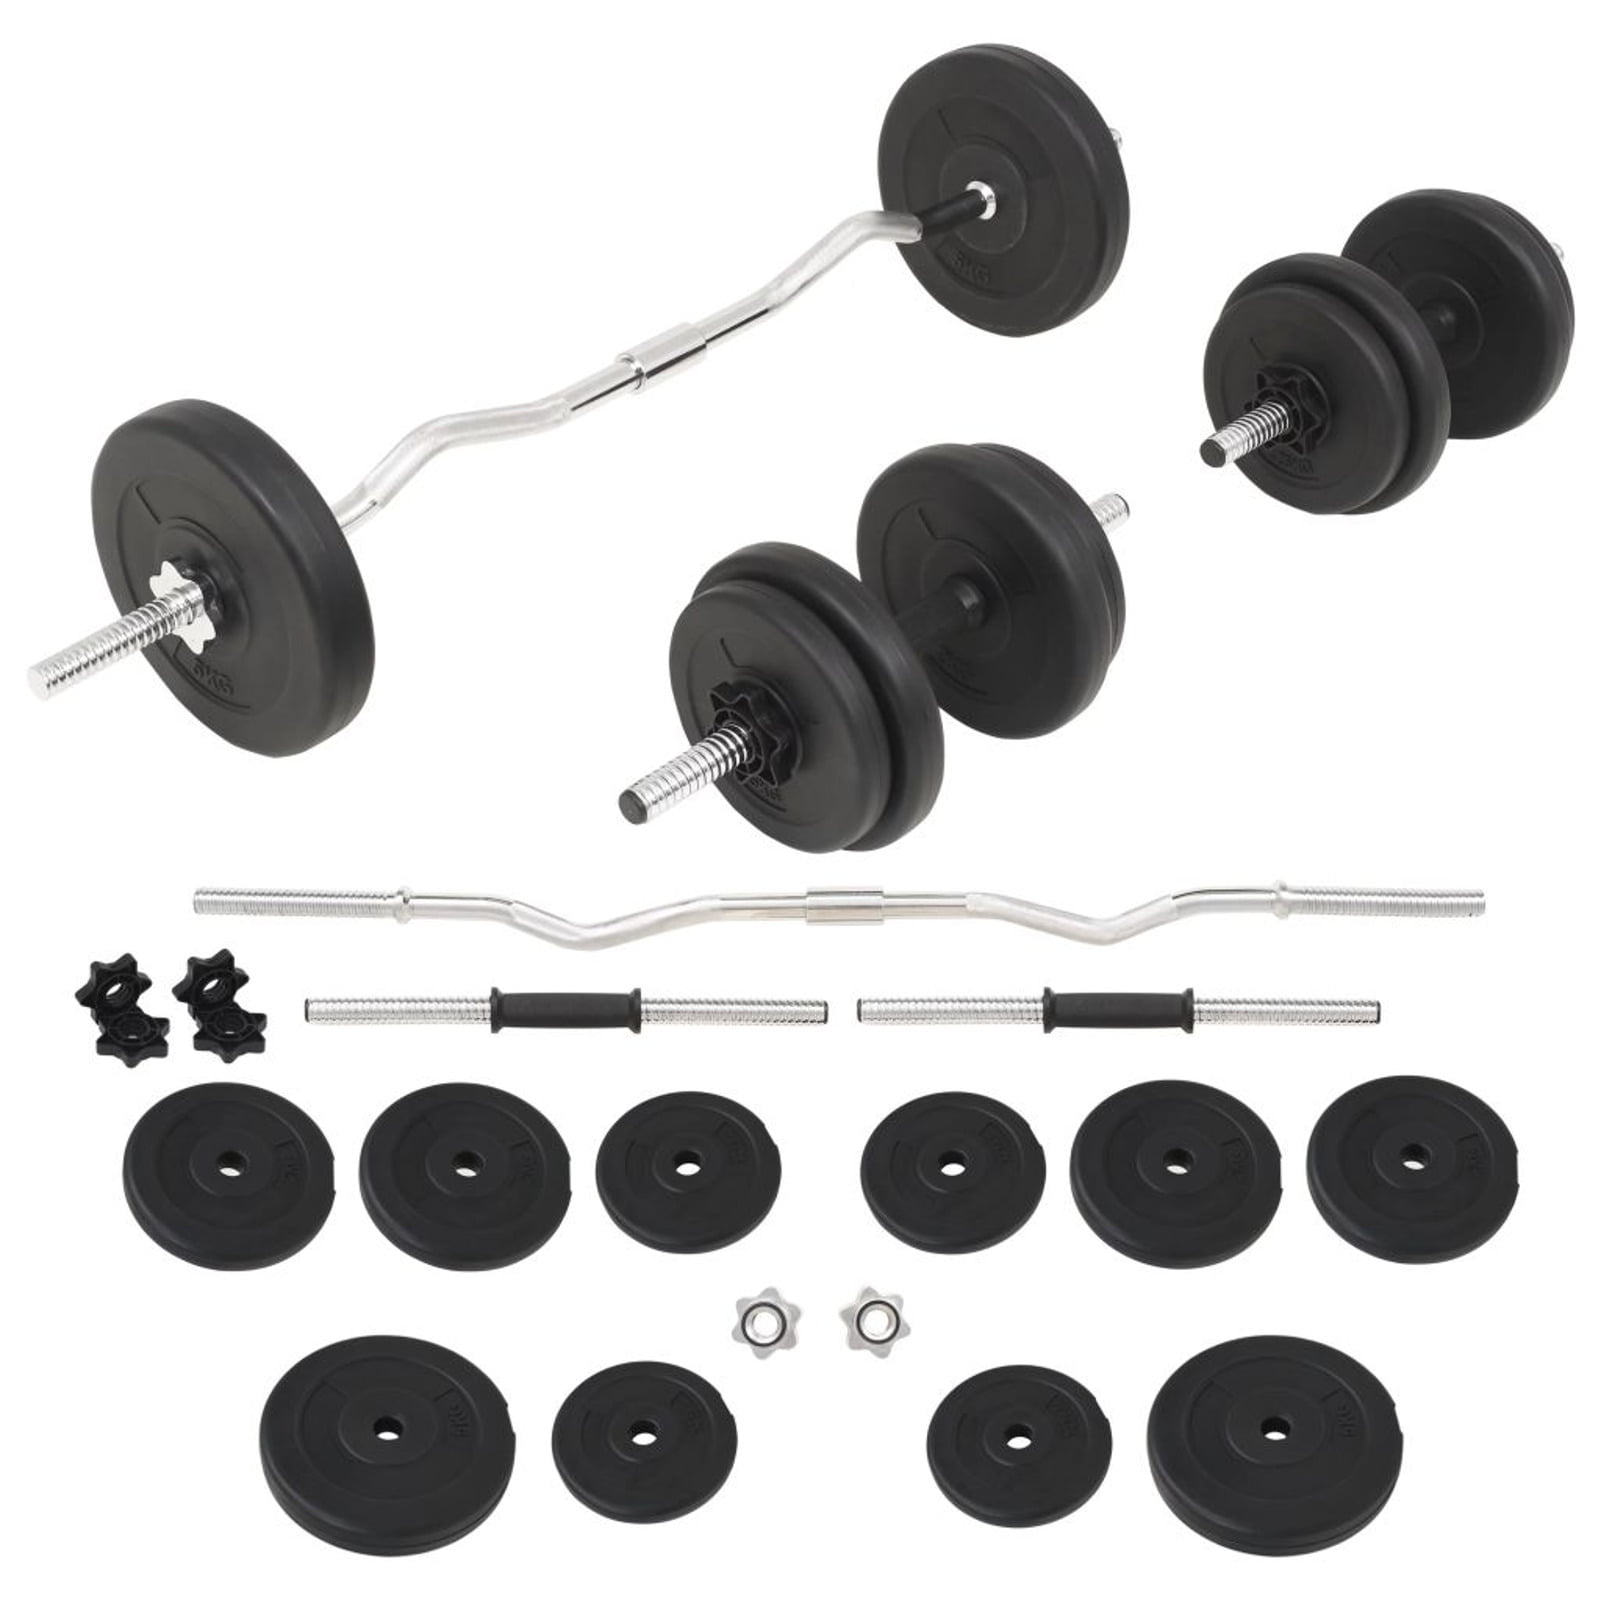 Details about   US 5lb/40lb Weight Dumbbell Set Cap Gym Barbell Plates Body Workout Home Workout 